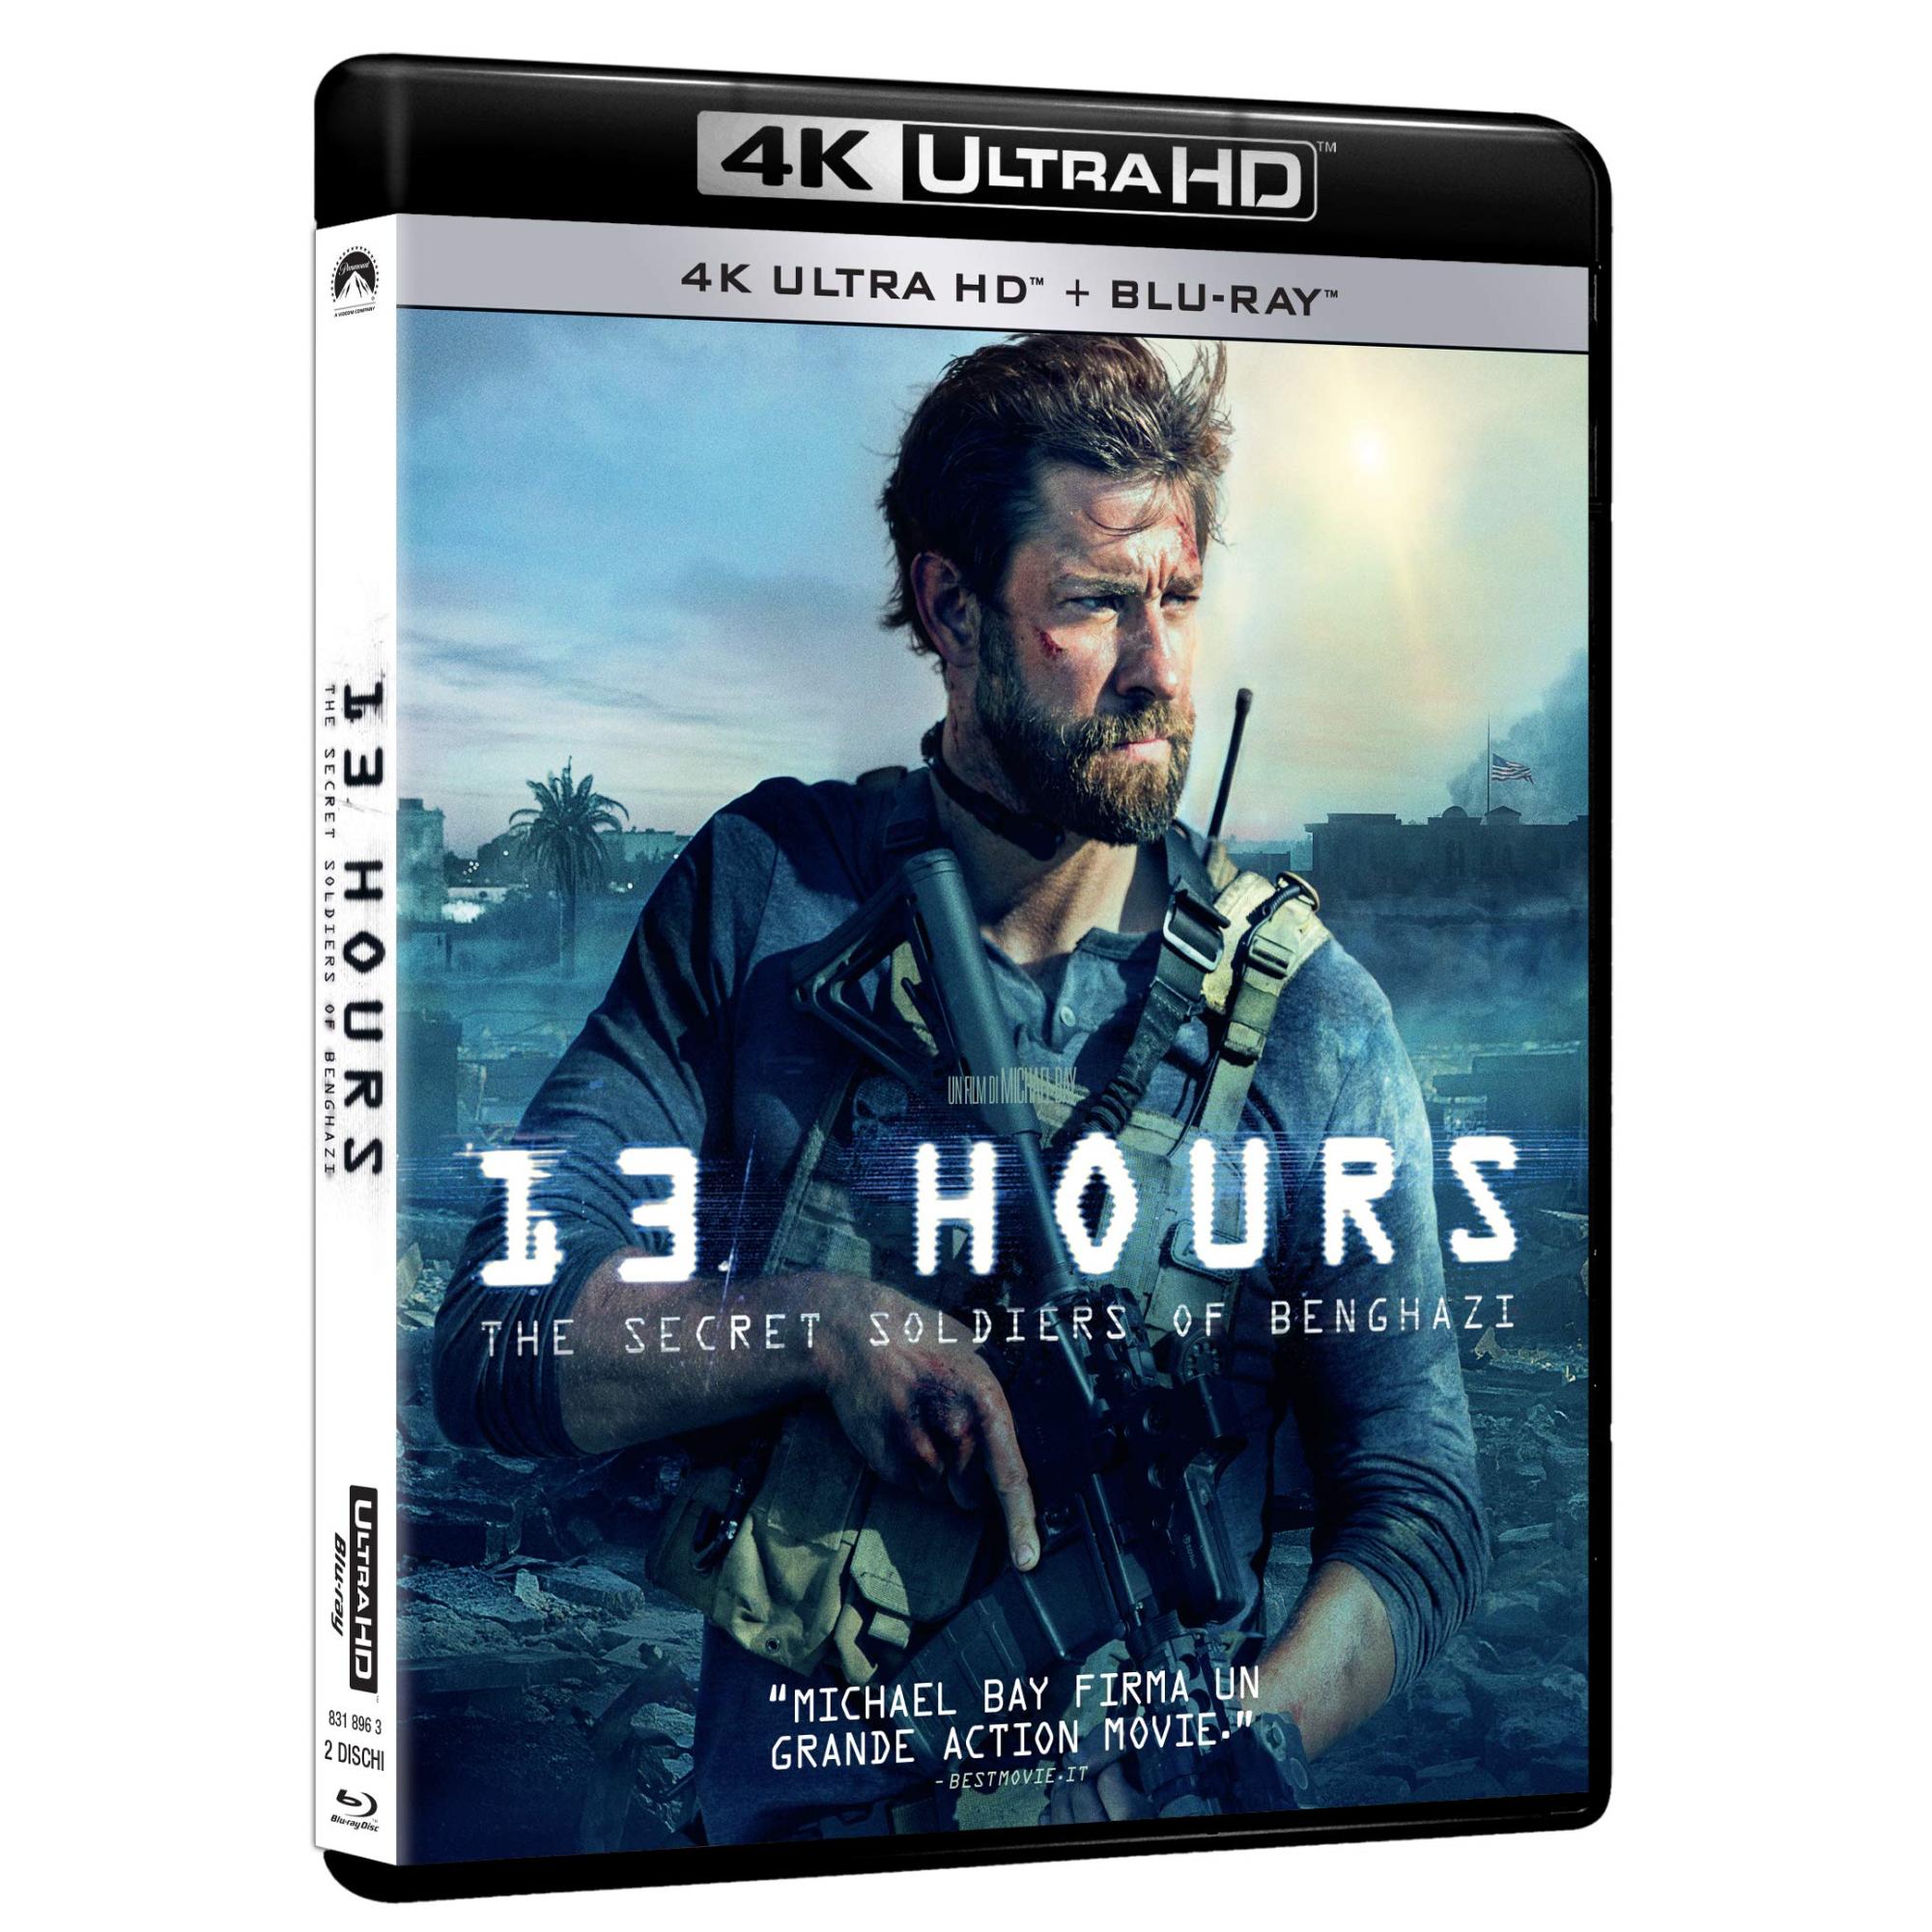 13 HOURS - THE SECRECT SOLDIER OF BENGHAZI (4K ULTRA HD+BLU-RAY)